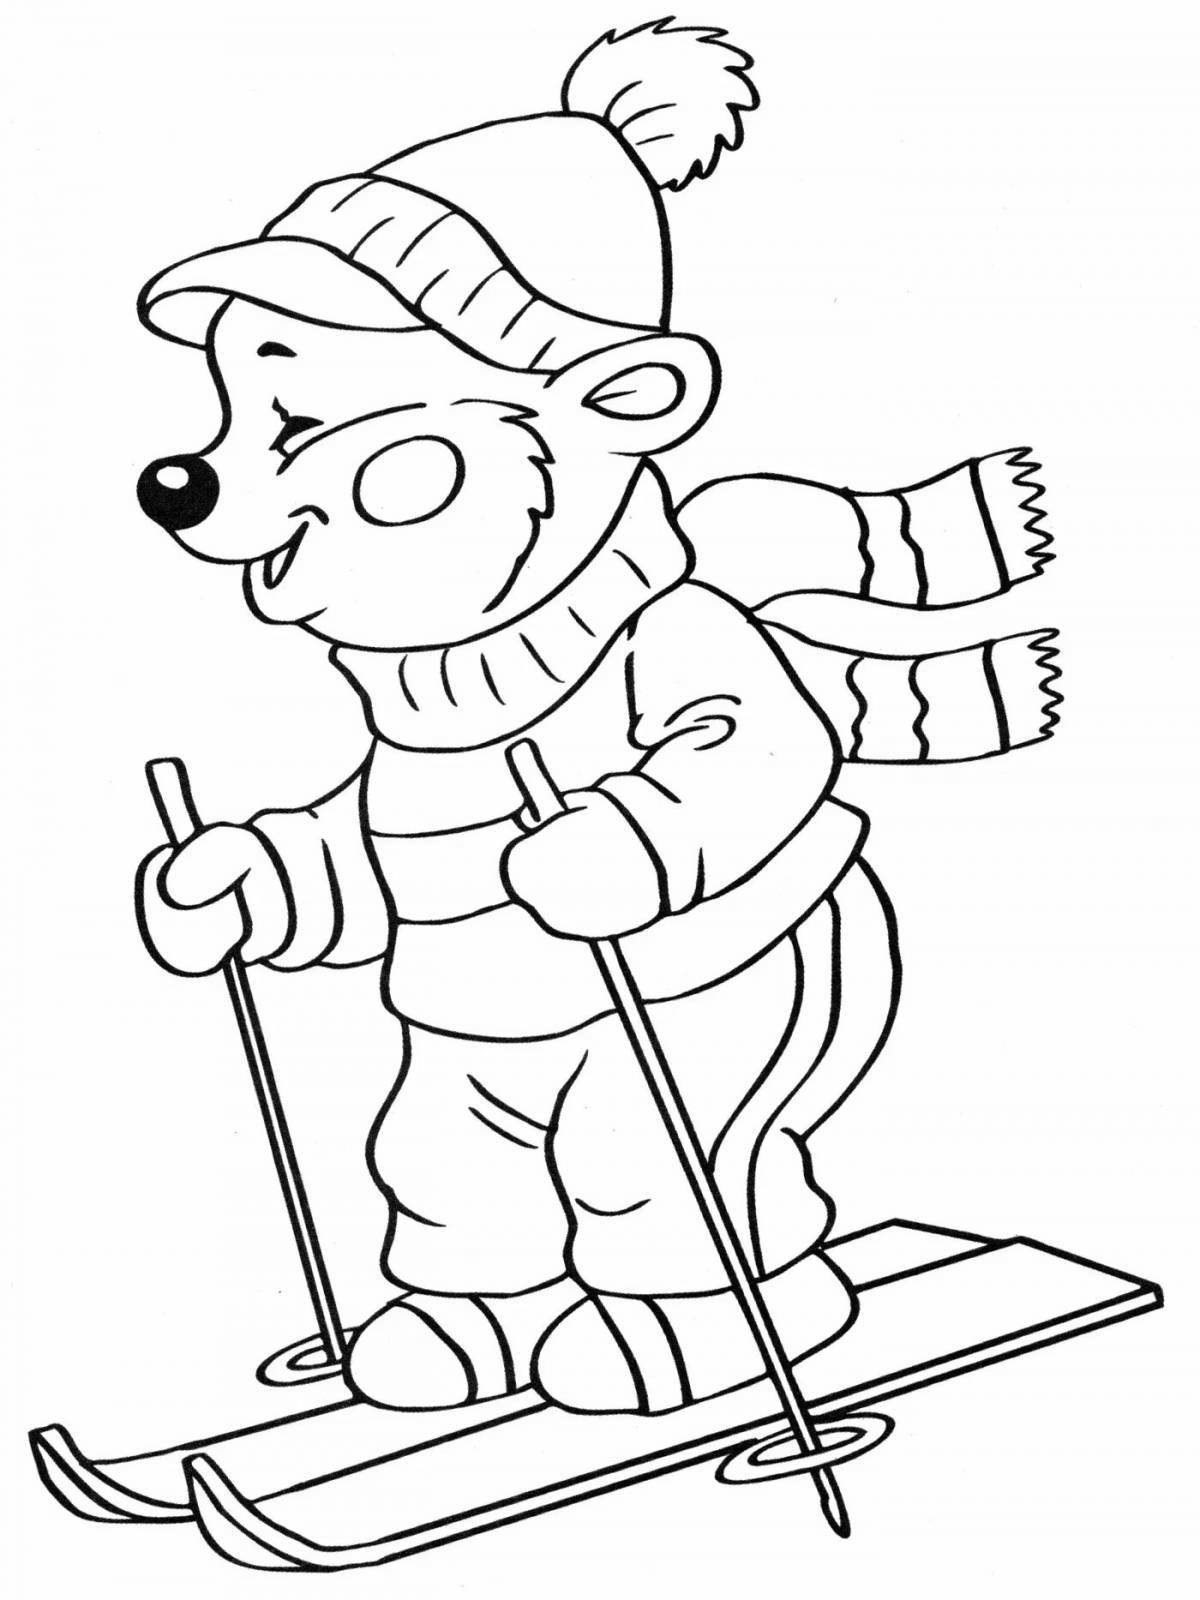 Exquisite dhow winter sports coloring book